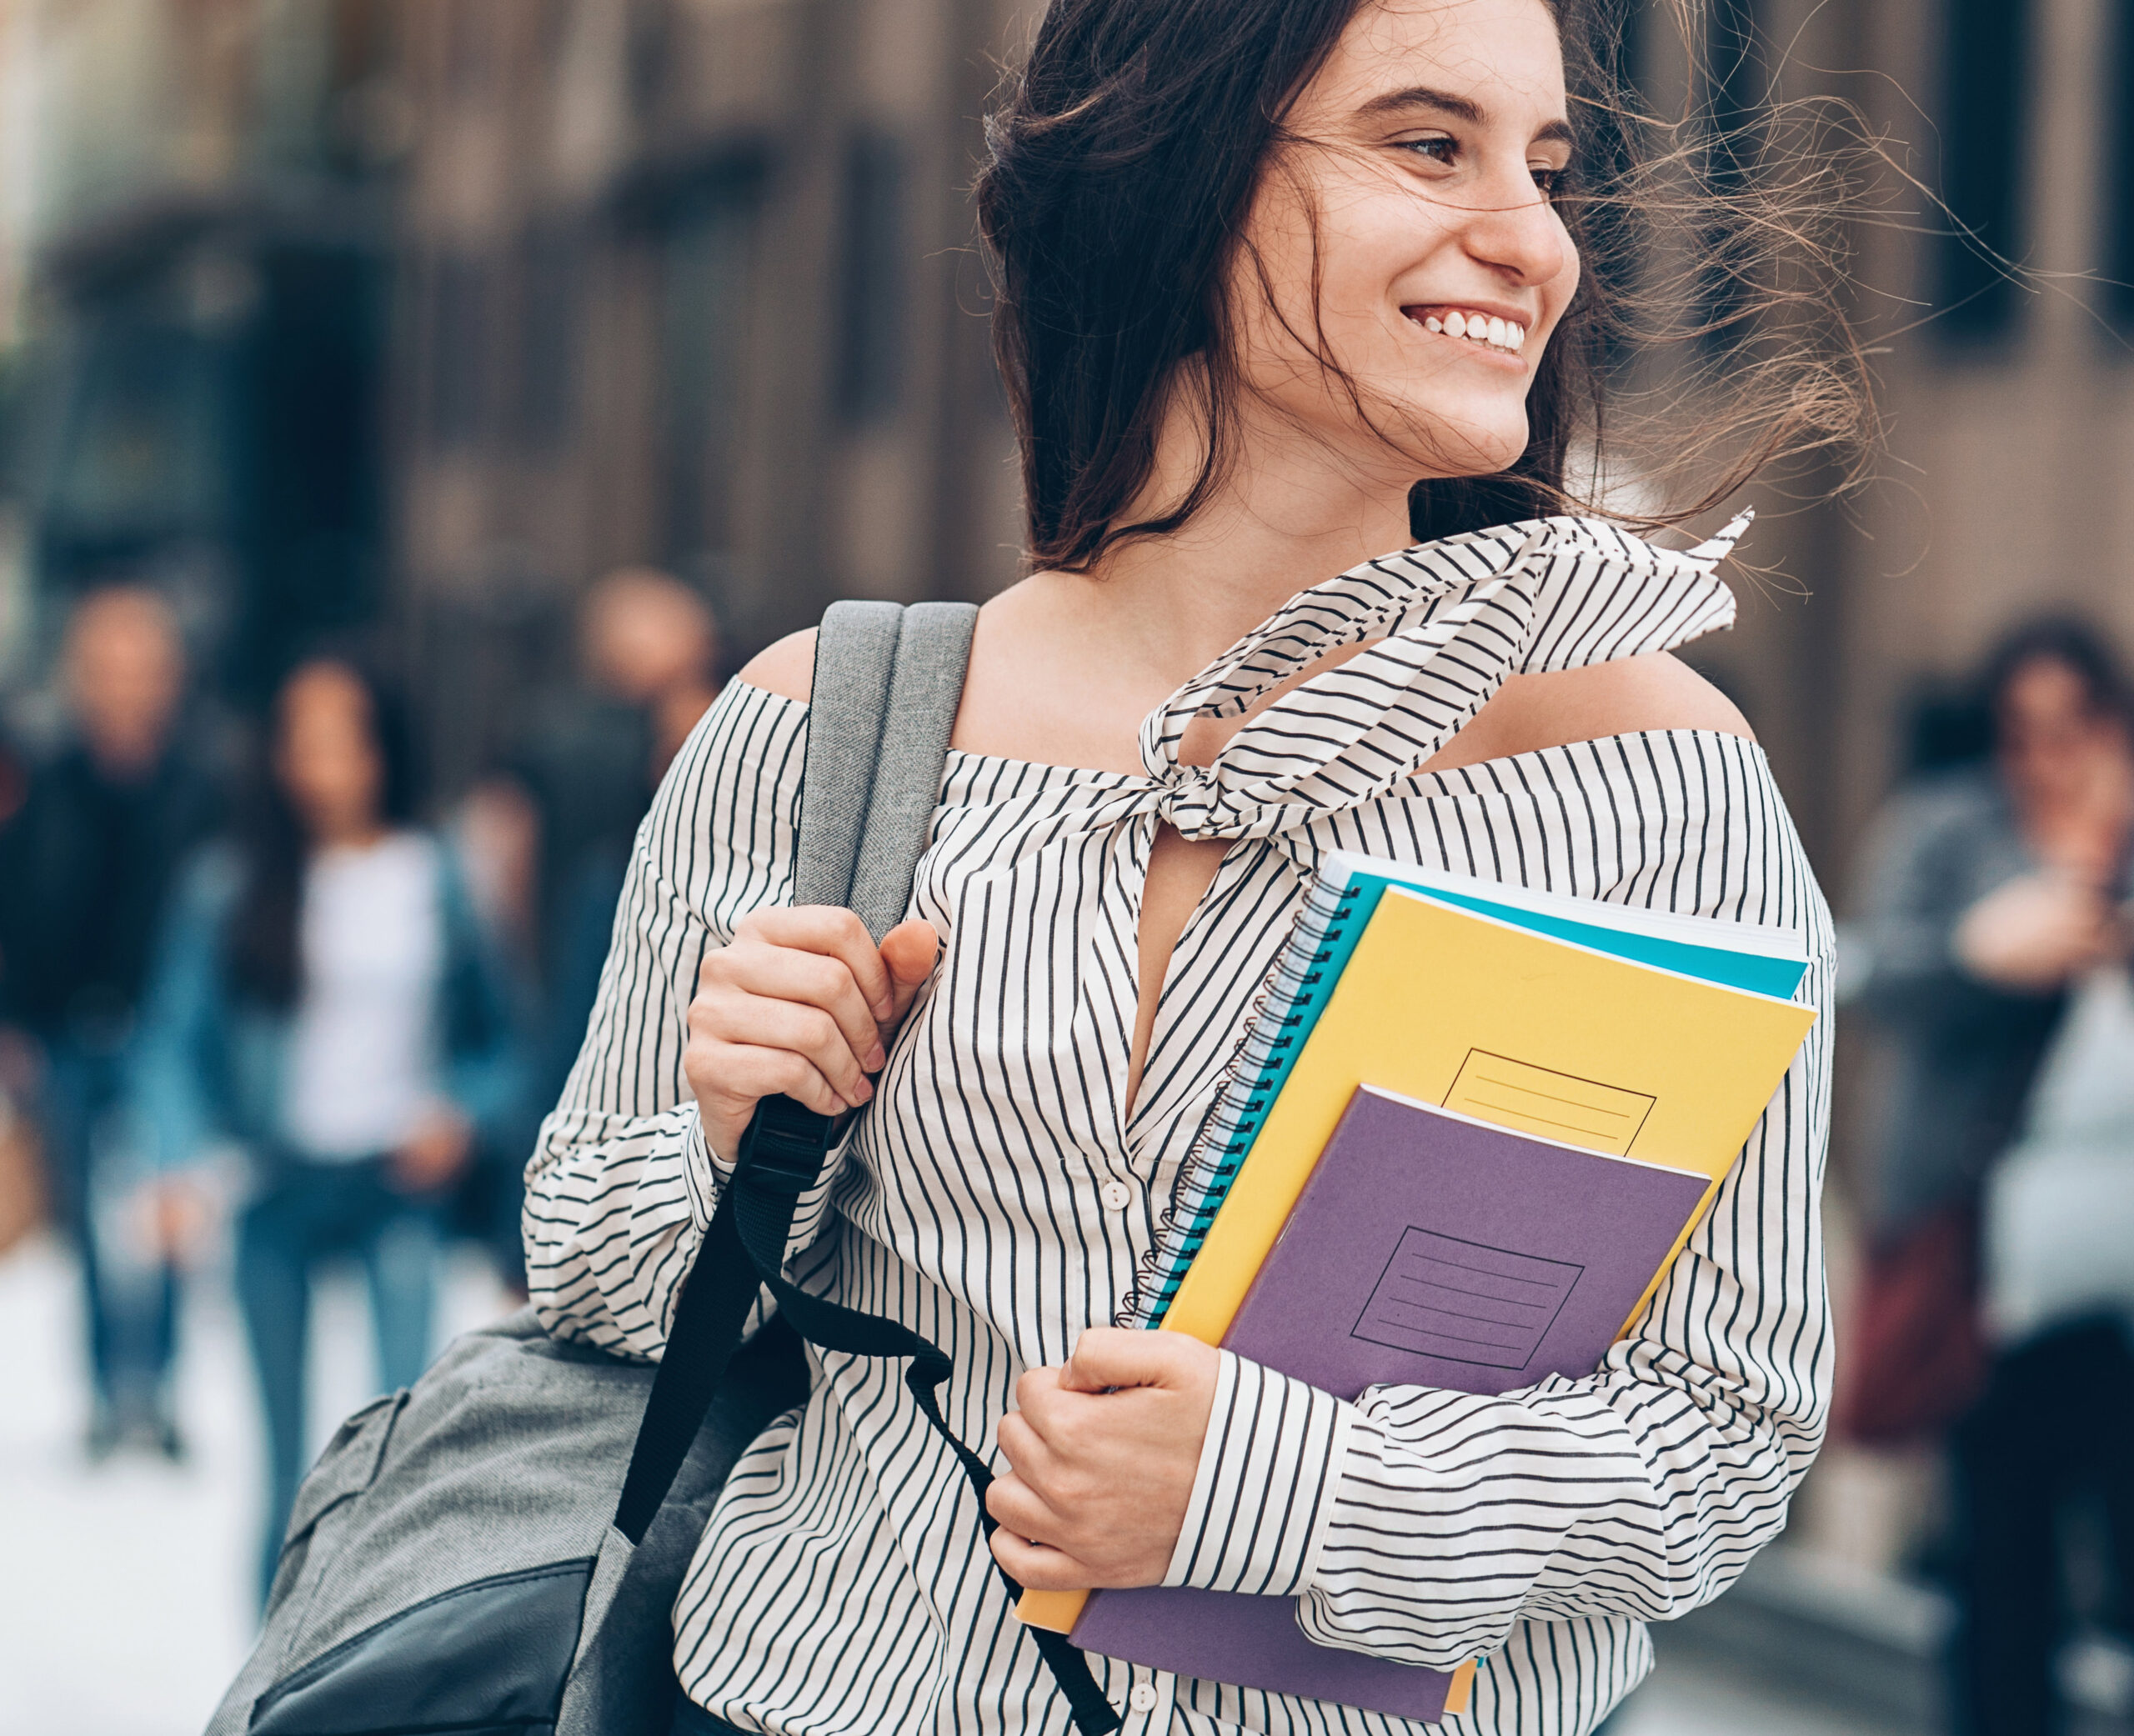 Smiling woman carries her books through campus.